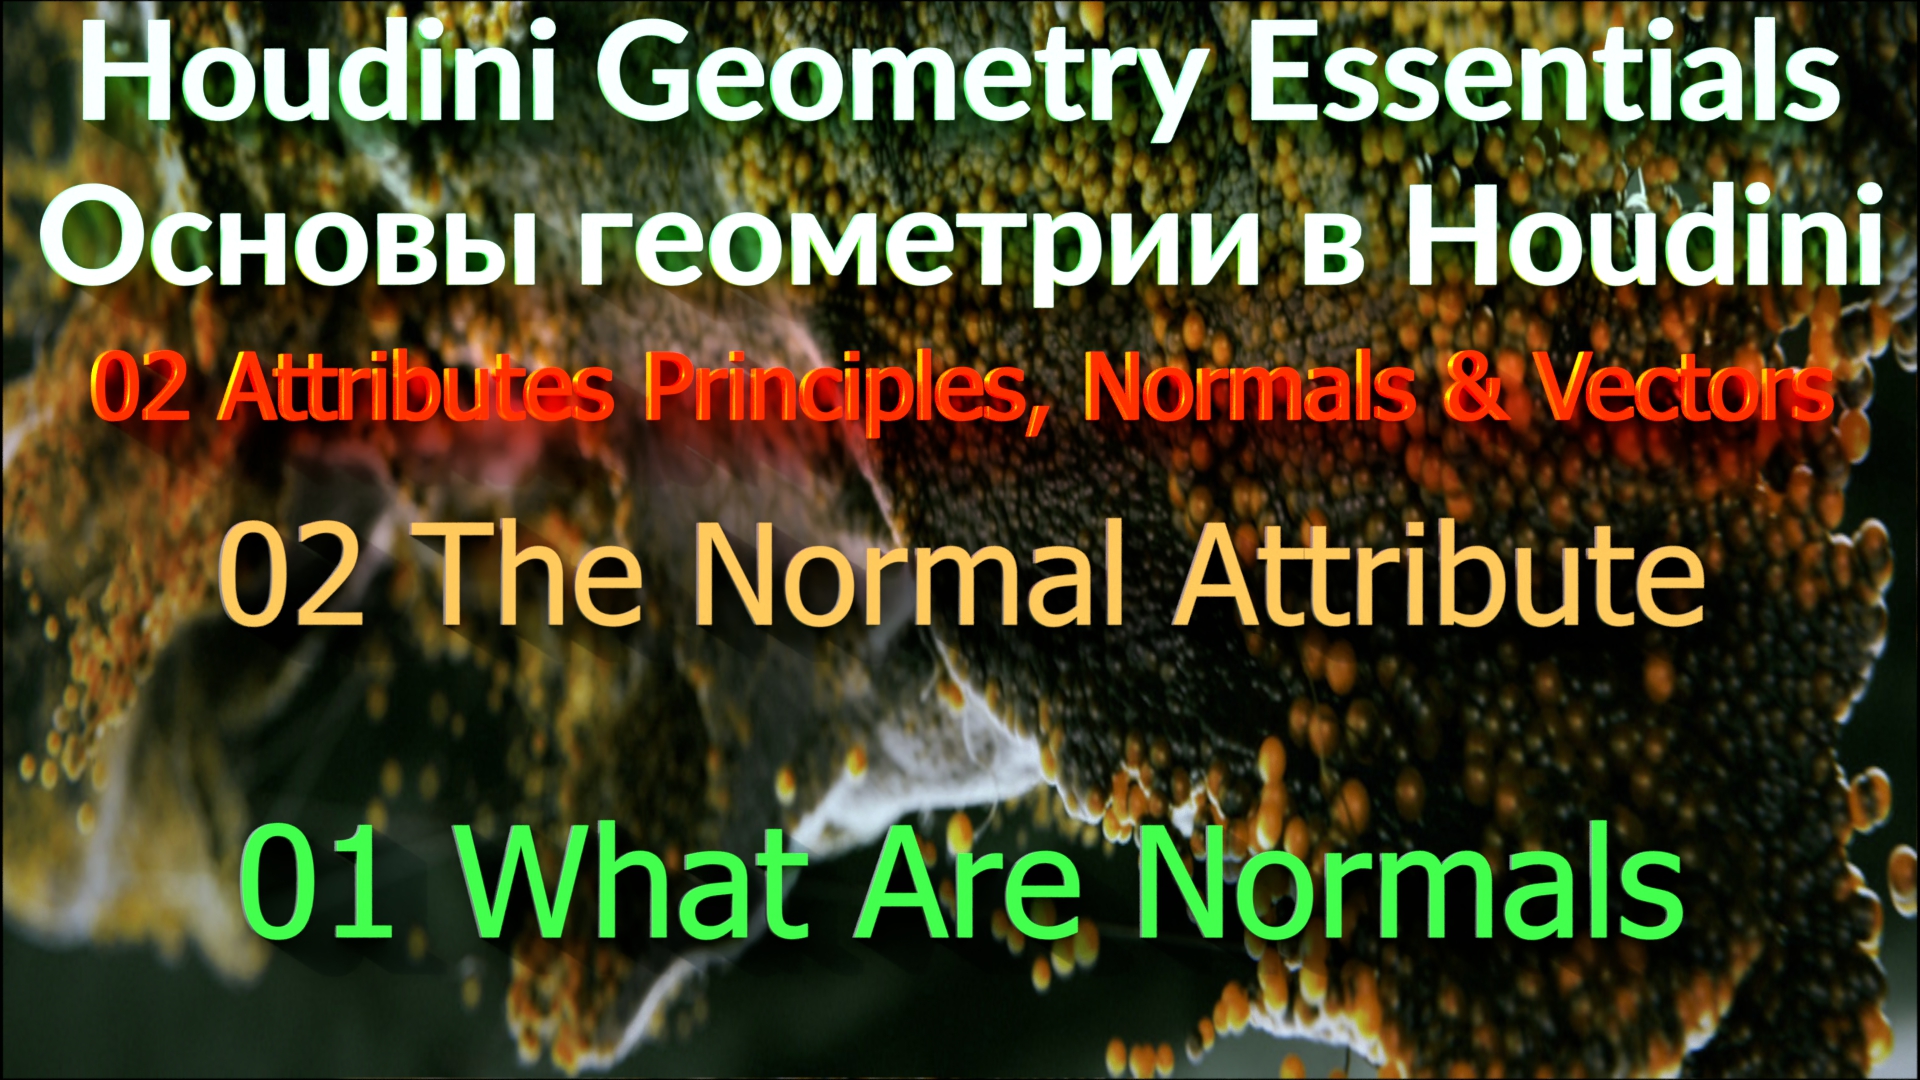 02_02_01 What Are Normals